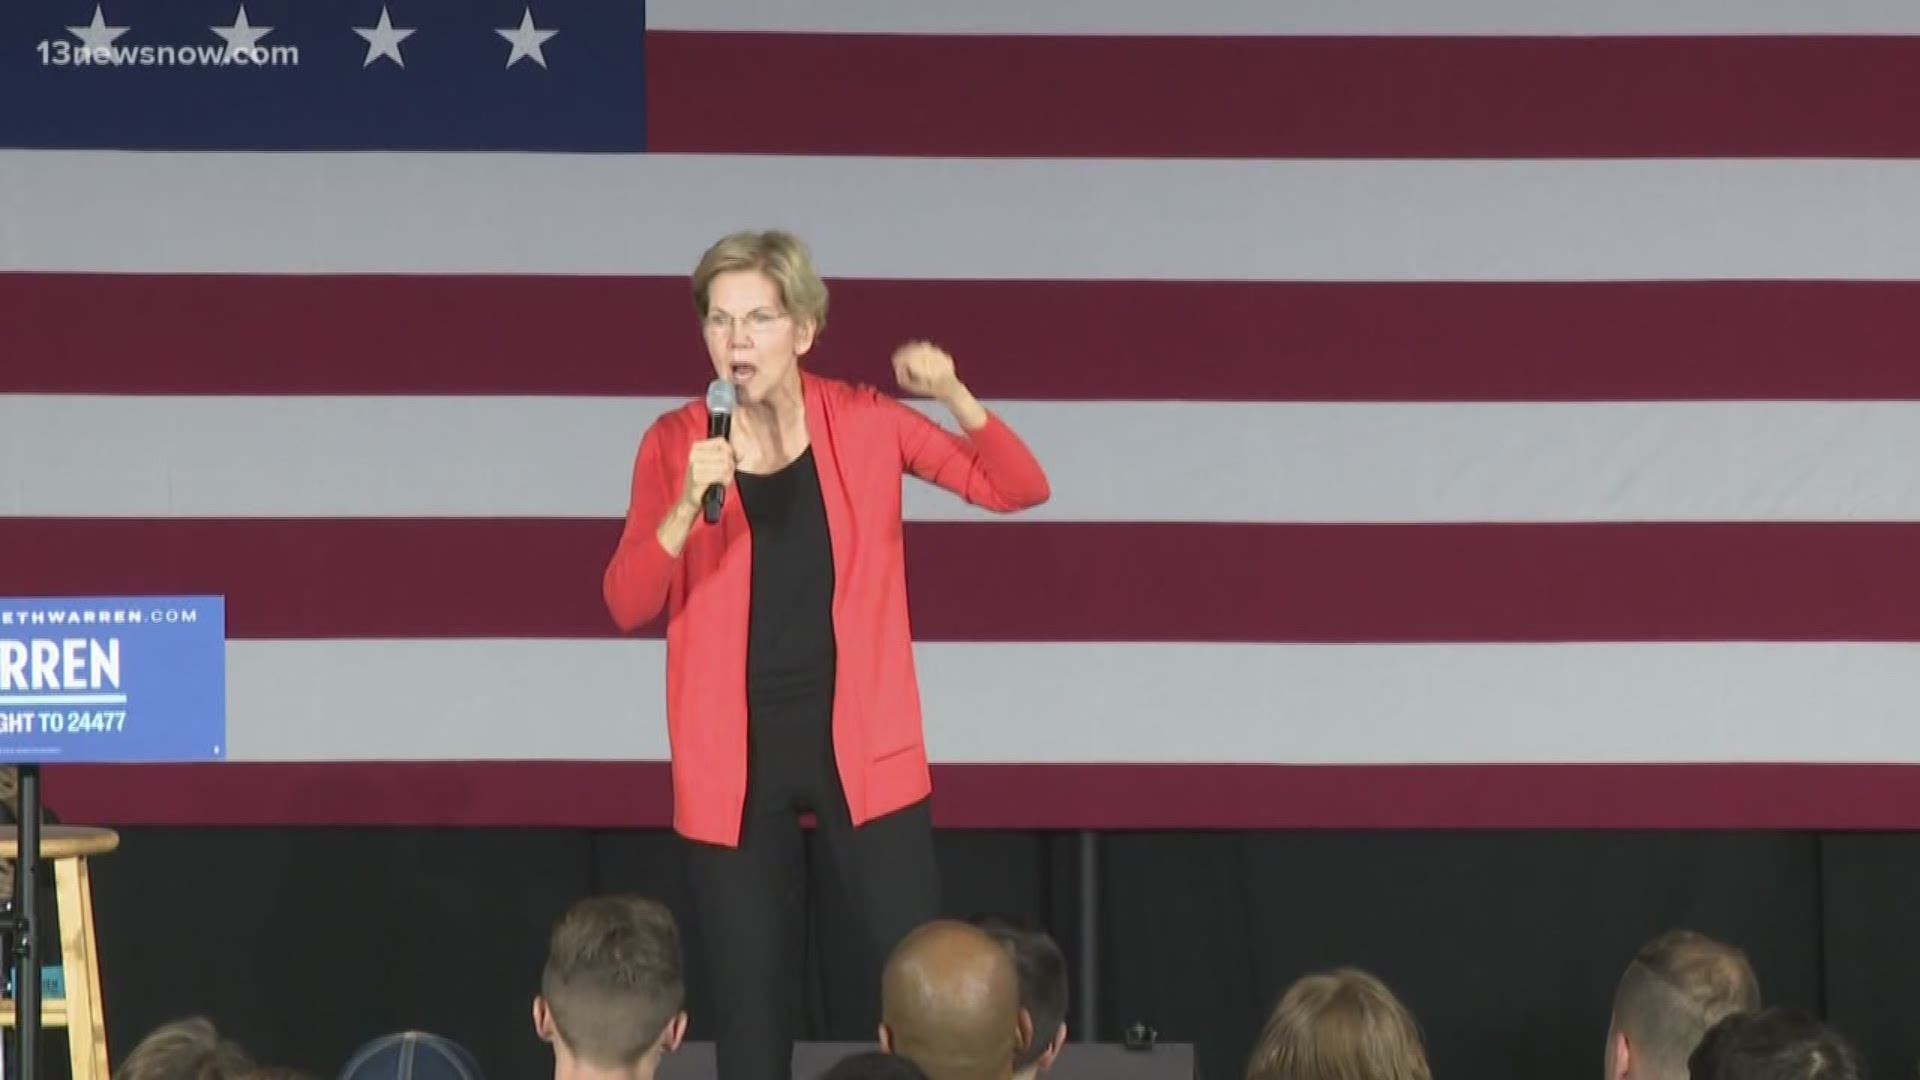 Elizabeth Warren stopped in Norfolk for a townhall Friday. Money was her main focus and she talked about taxing the nation's most wealthy.